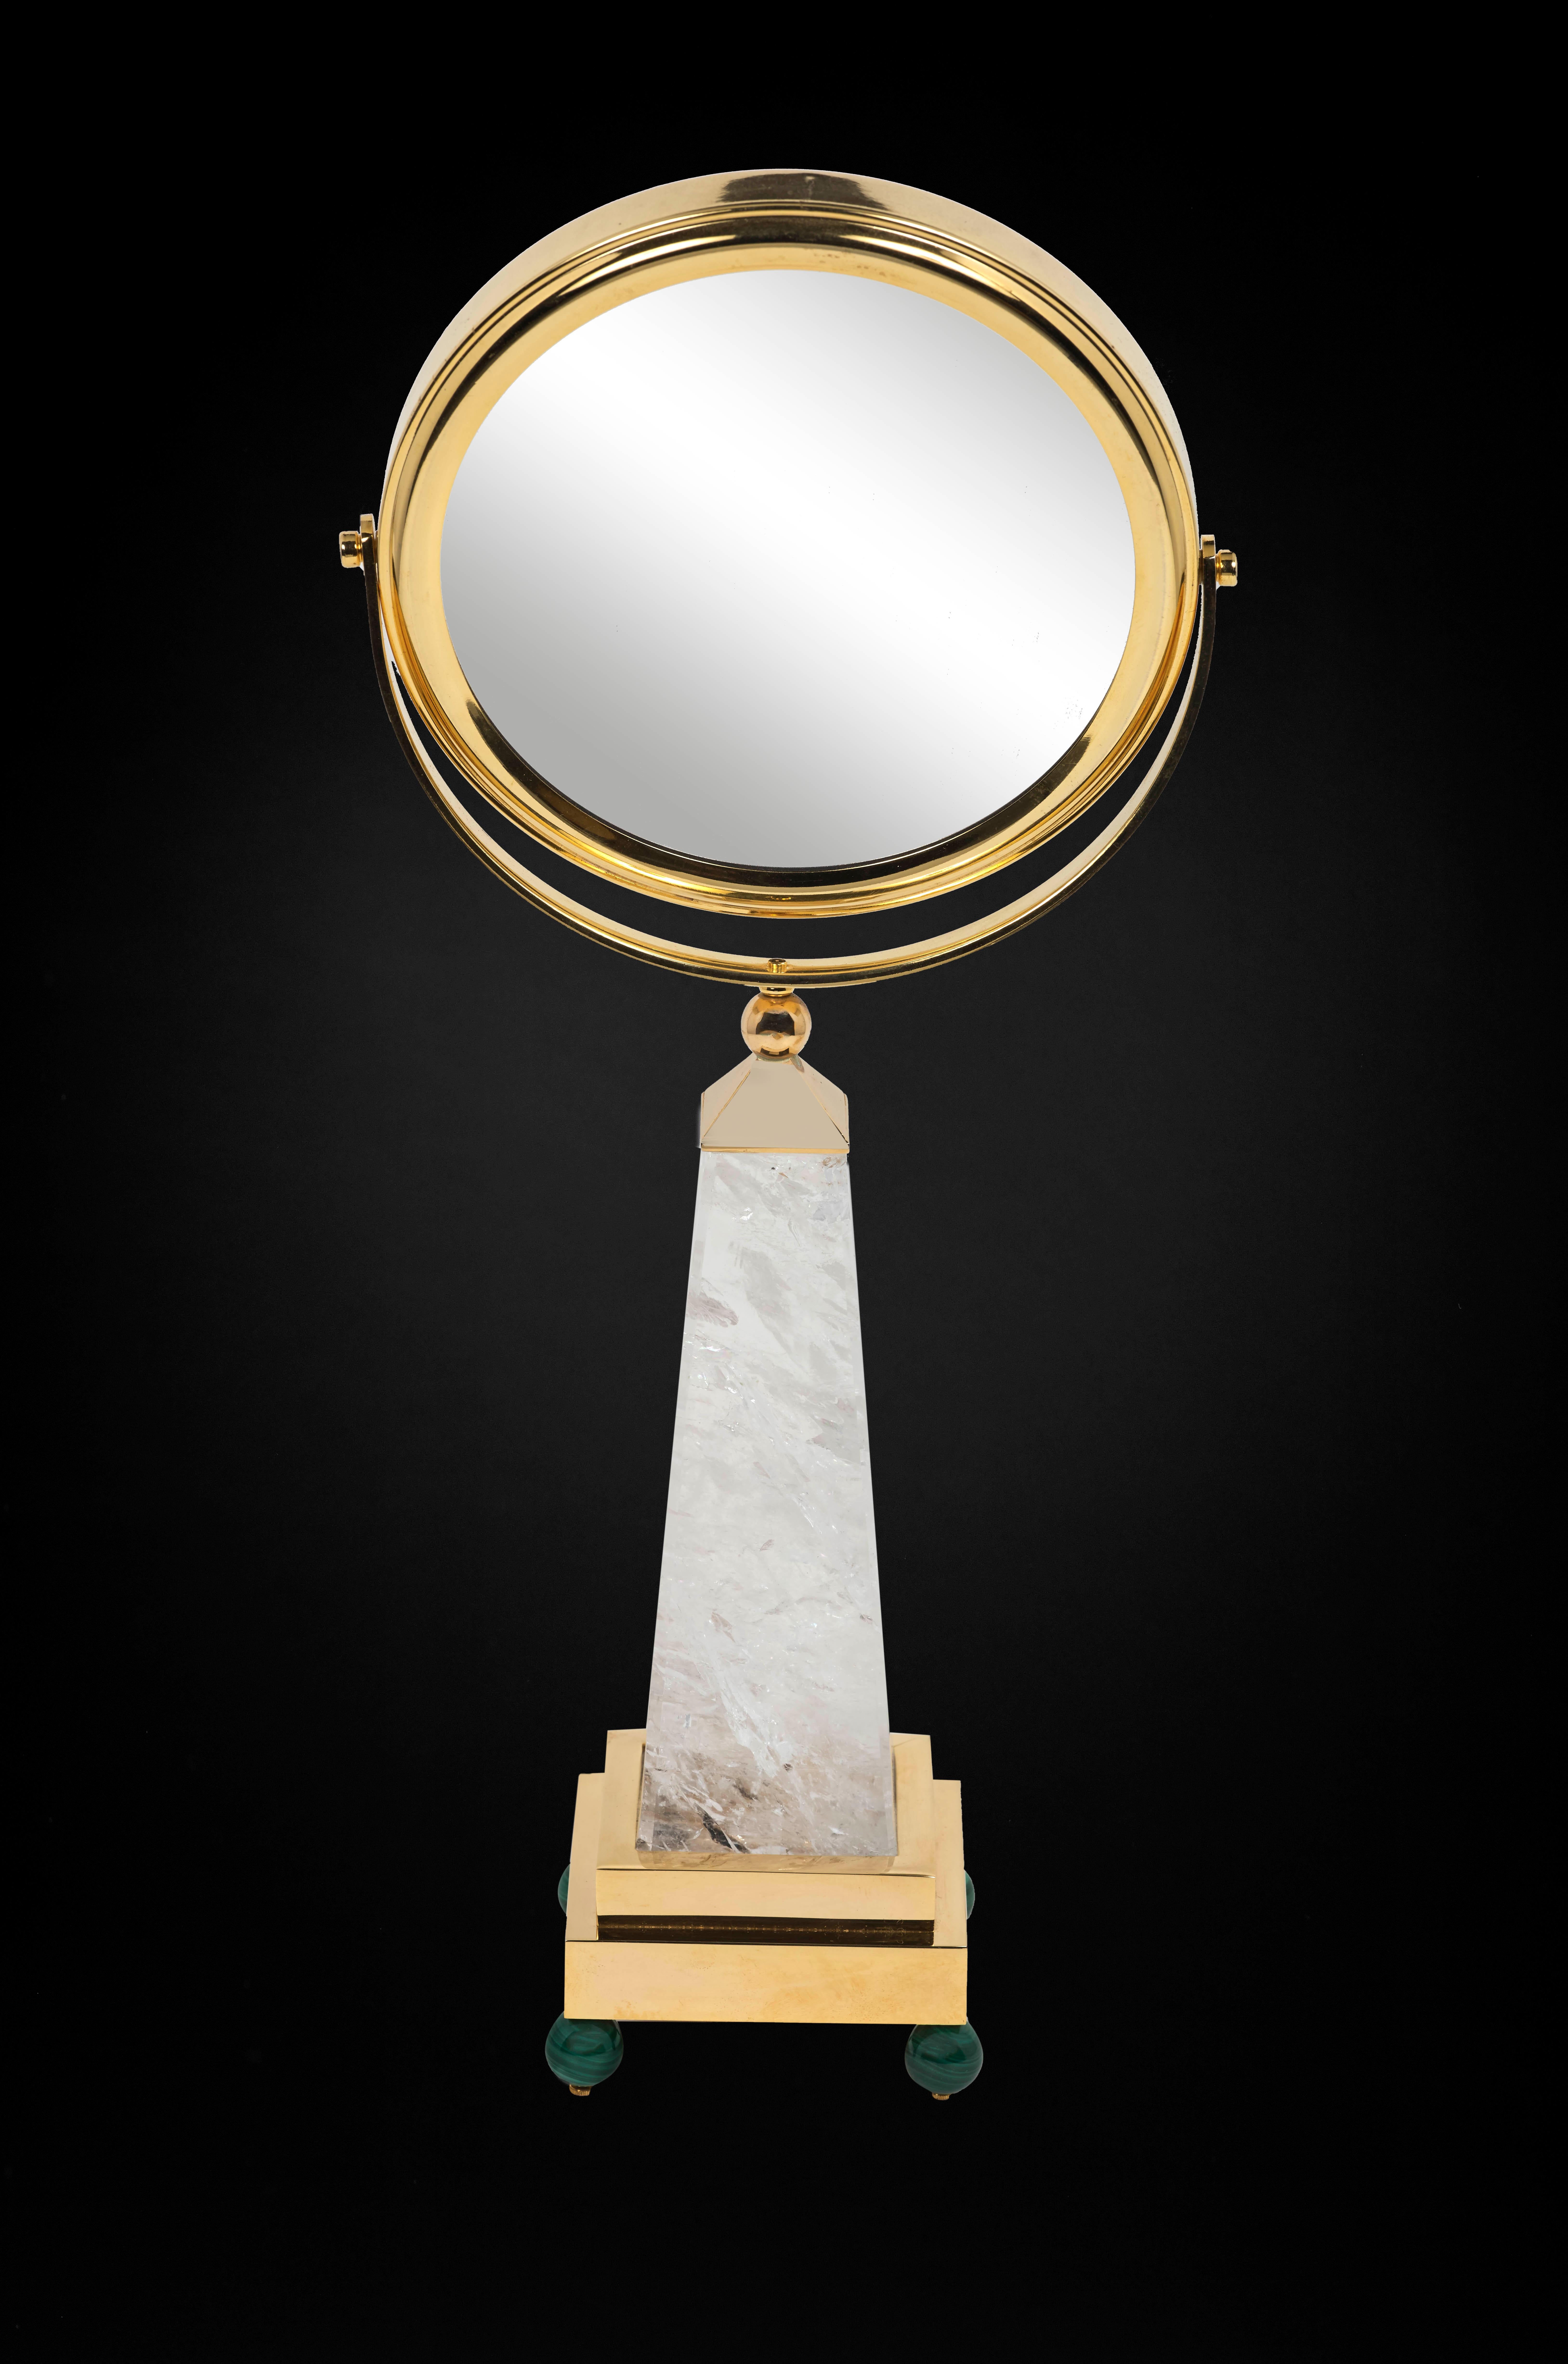 Rock crystal, malachite, 24K gold plated table mirror By Alexandre Vossion.
Unique.
Made in Paris.